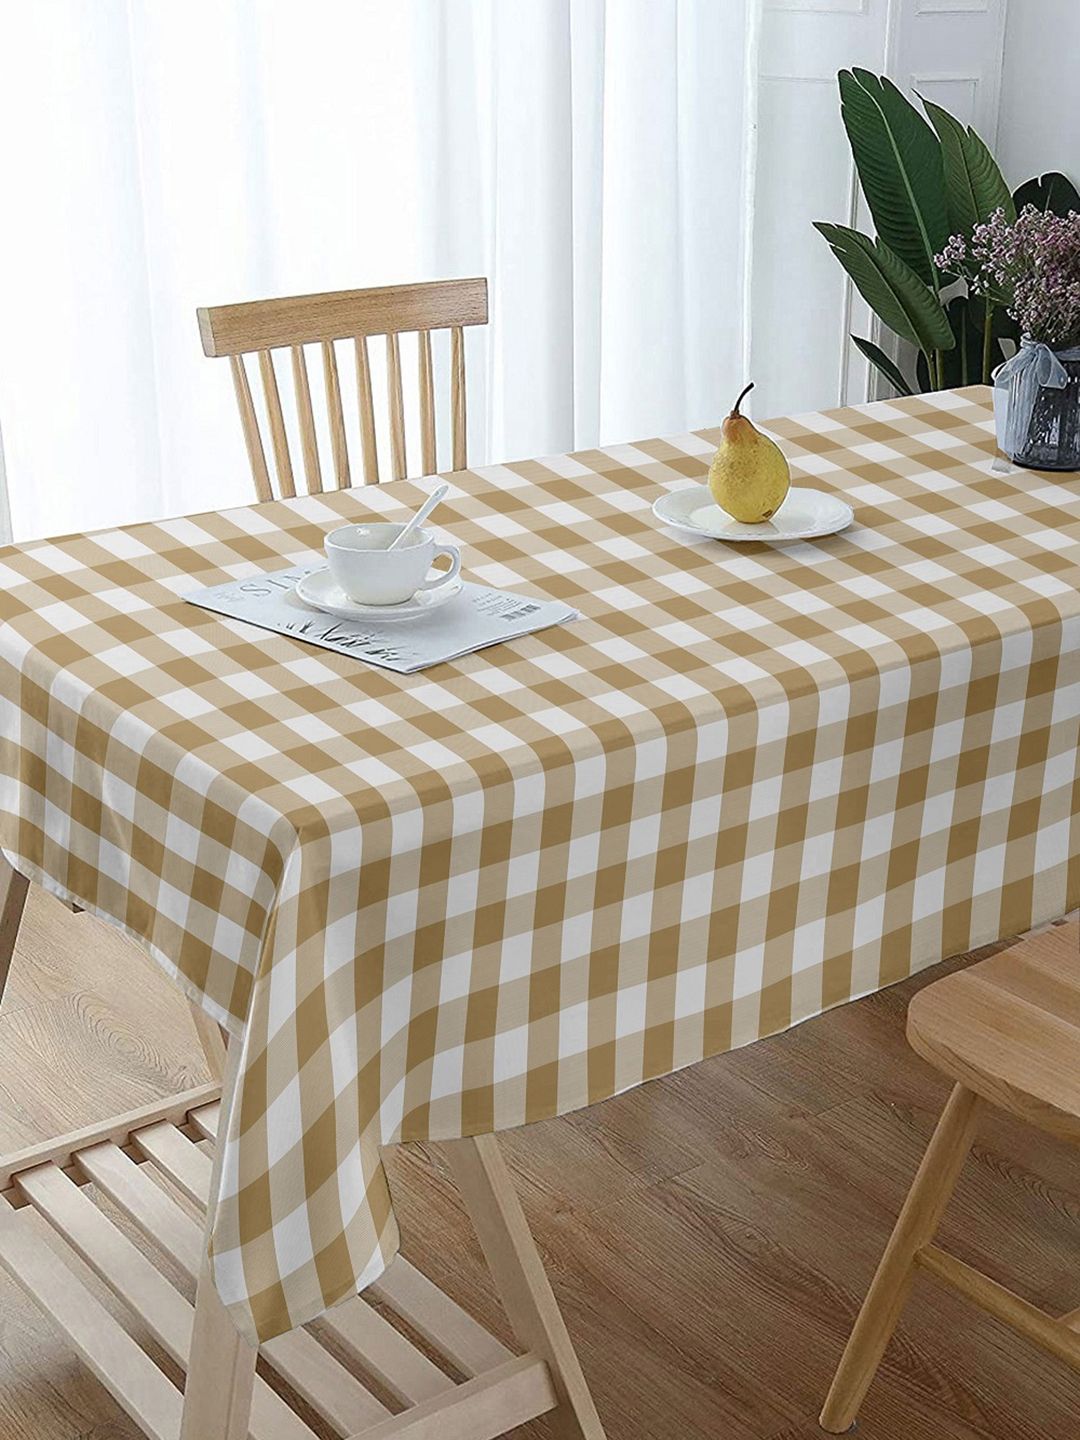 Lushomes Beige & White Checked Cotton 6-Seater Dining Table Cover Price in India